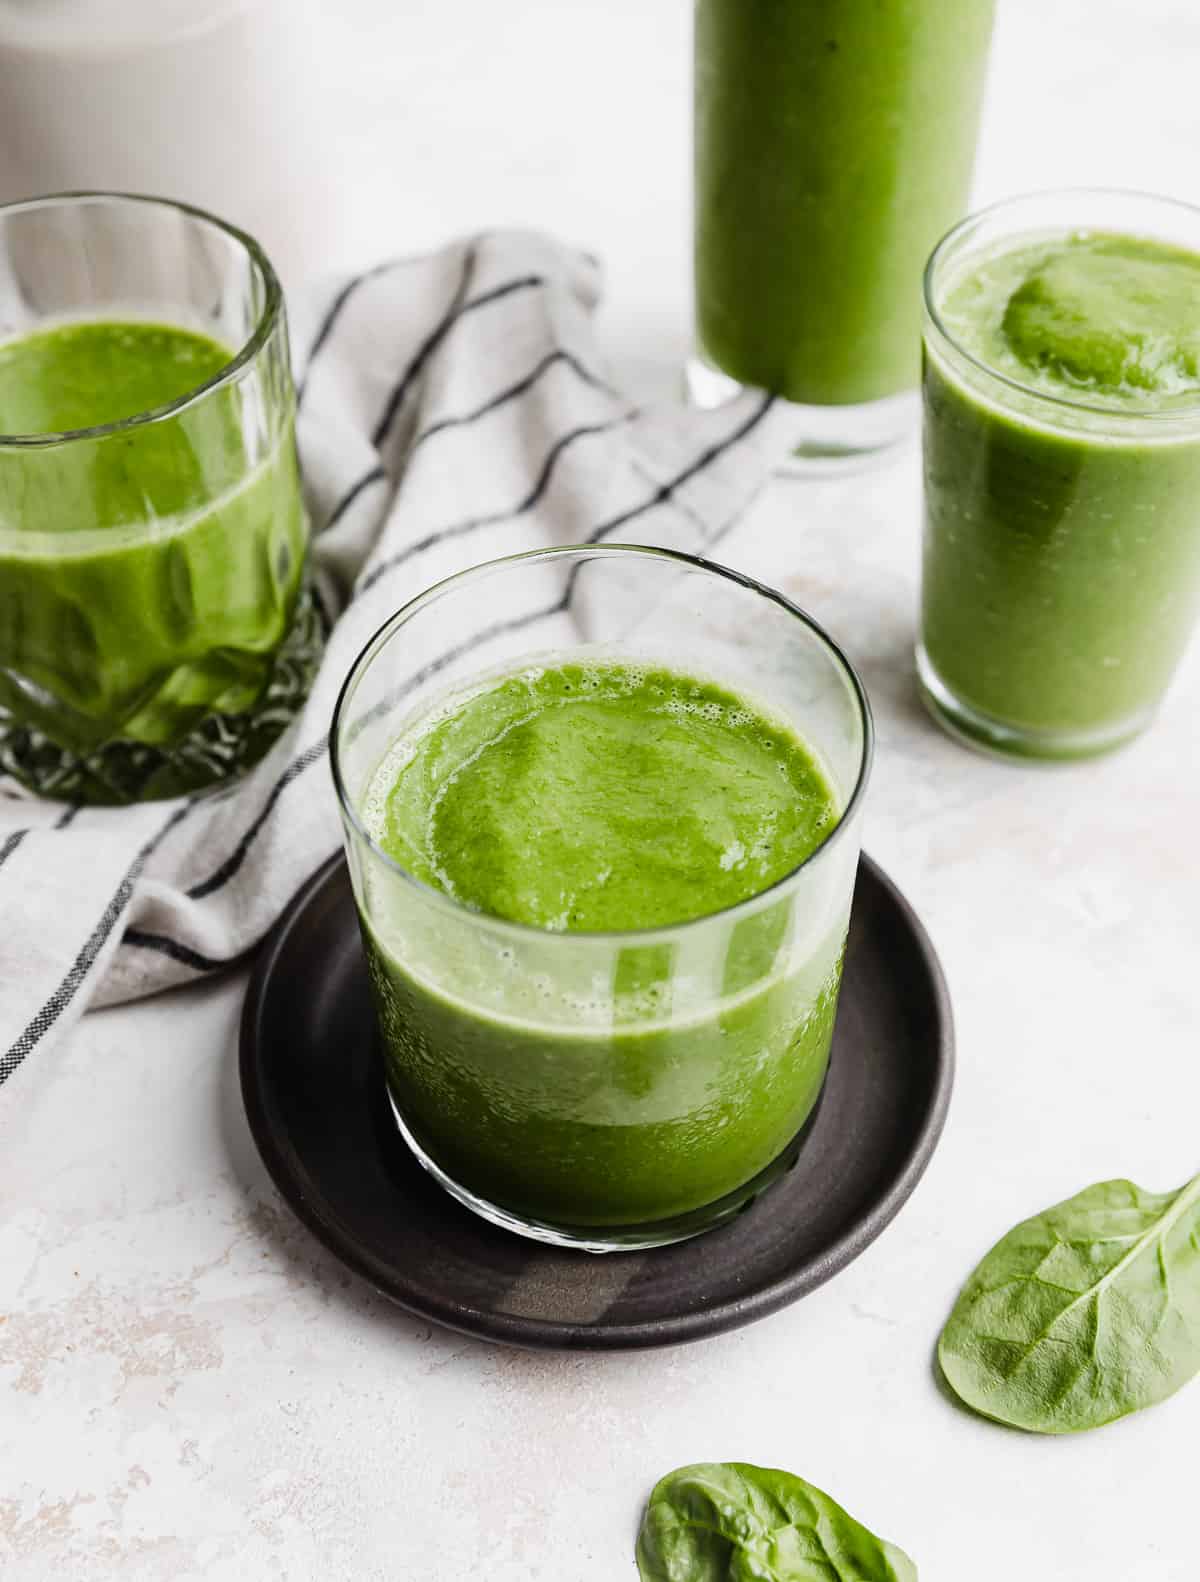 A clear glass filled with a green Pineapple Spinach Smoothie on a black plate, with three more glasses in the background that are filled with a green smoothie too.